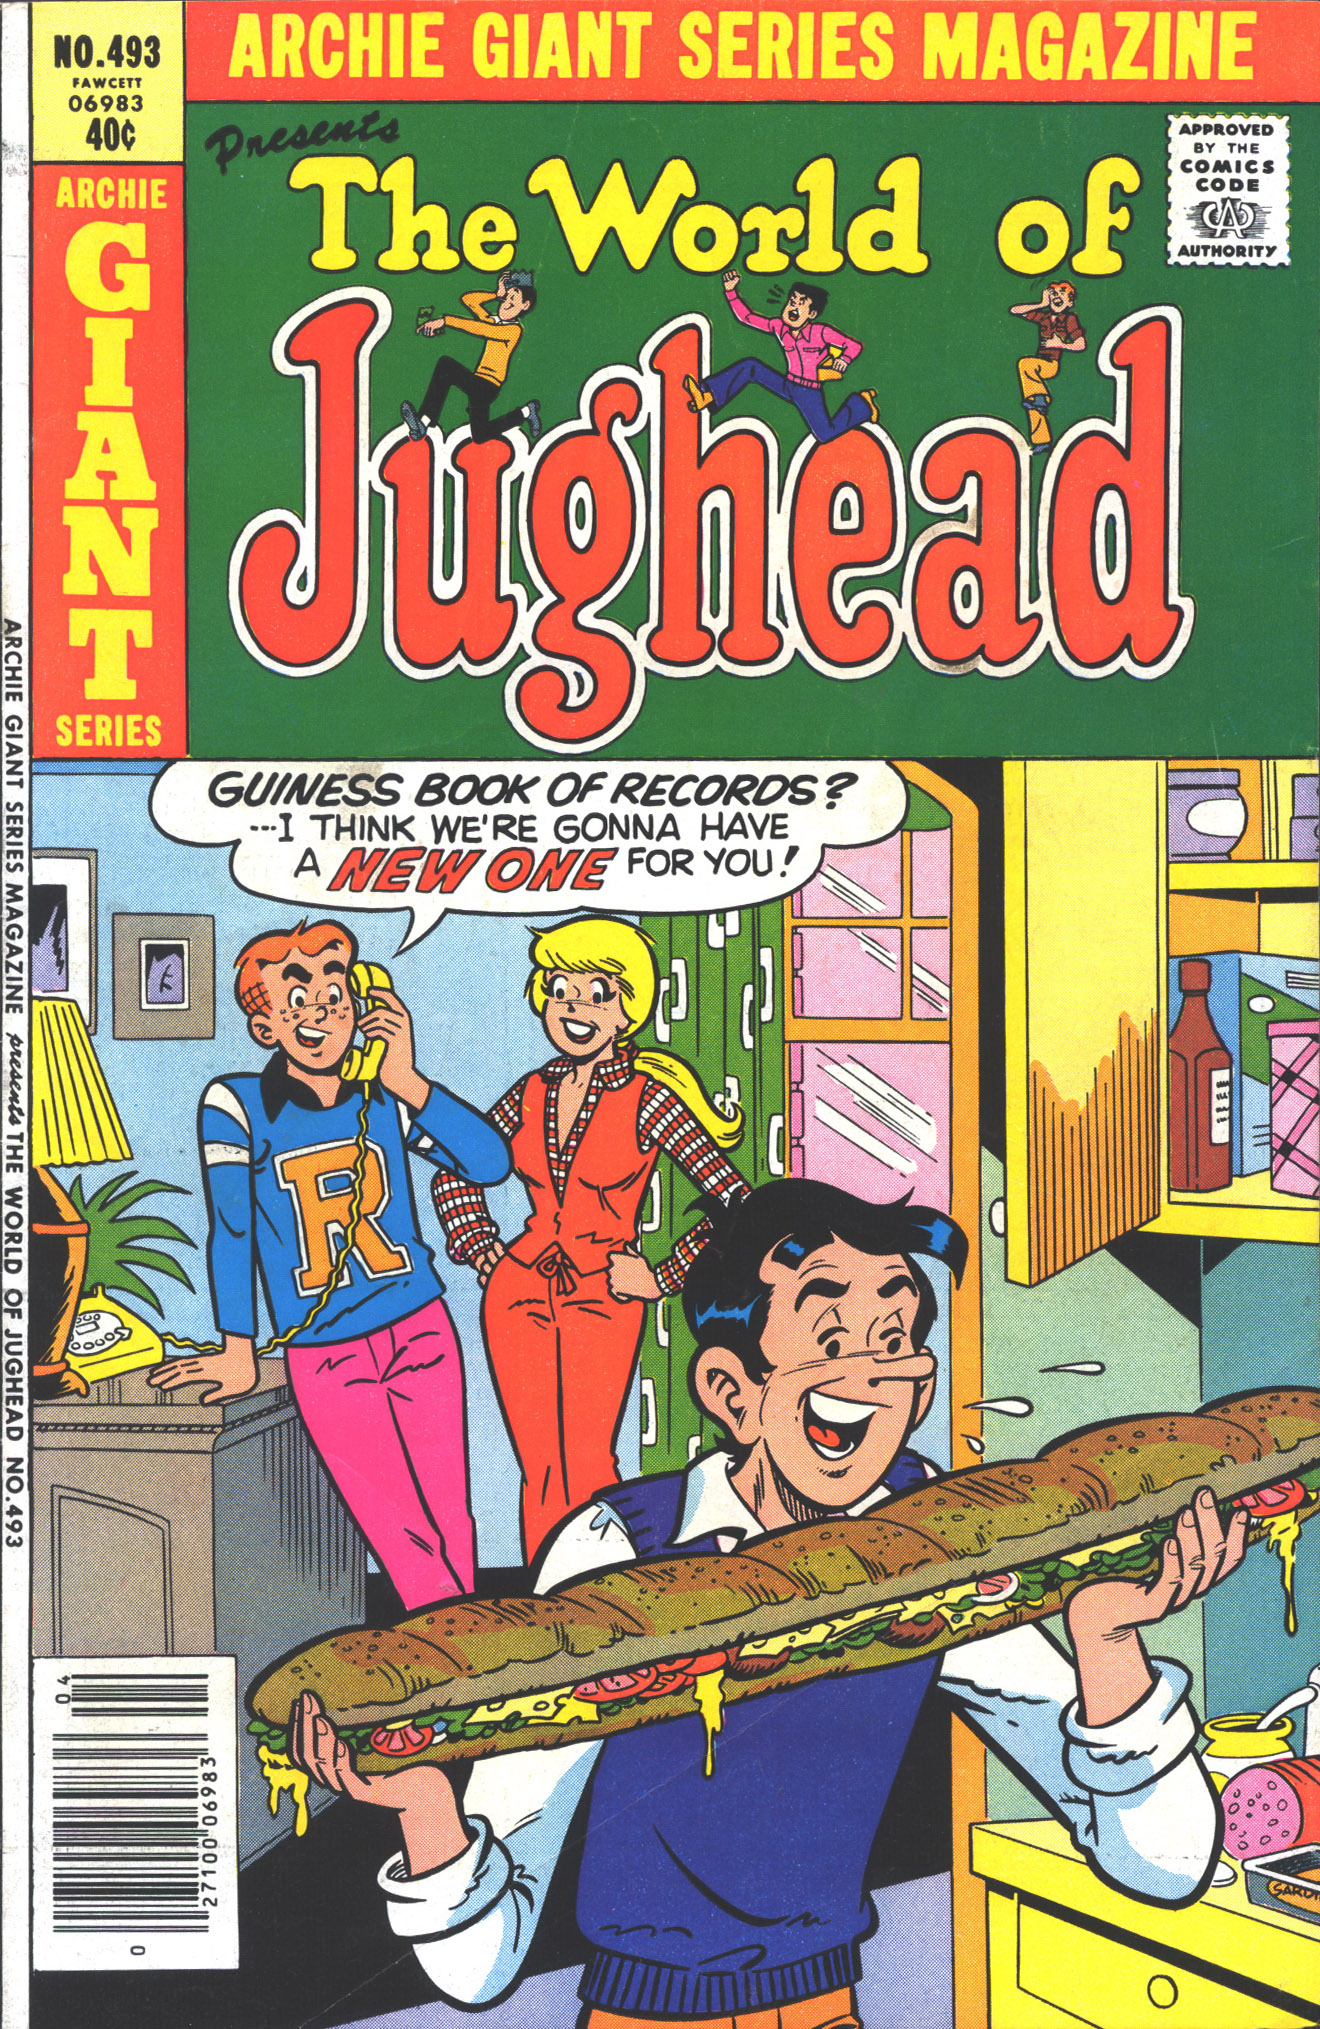 Read online Archie Giant Series Magazine comic -  Issue #493 - 1